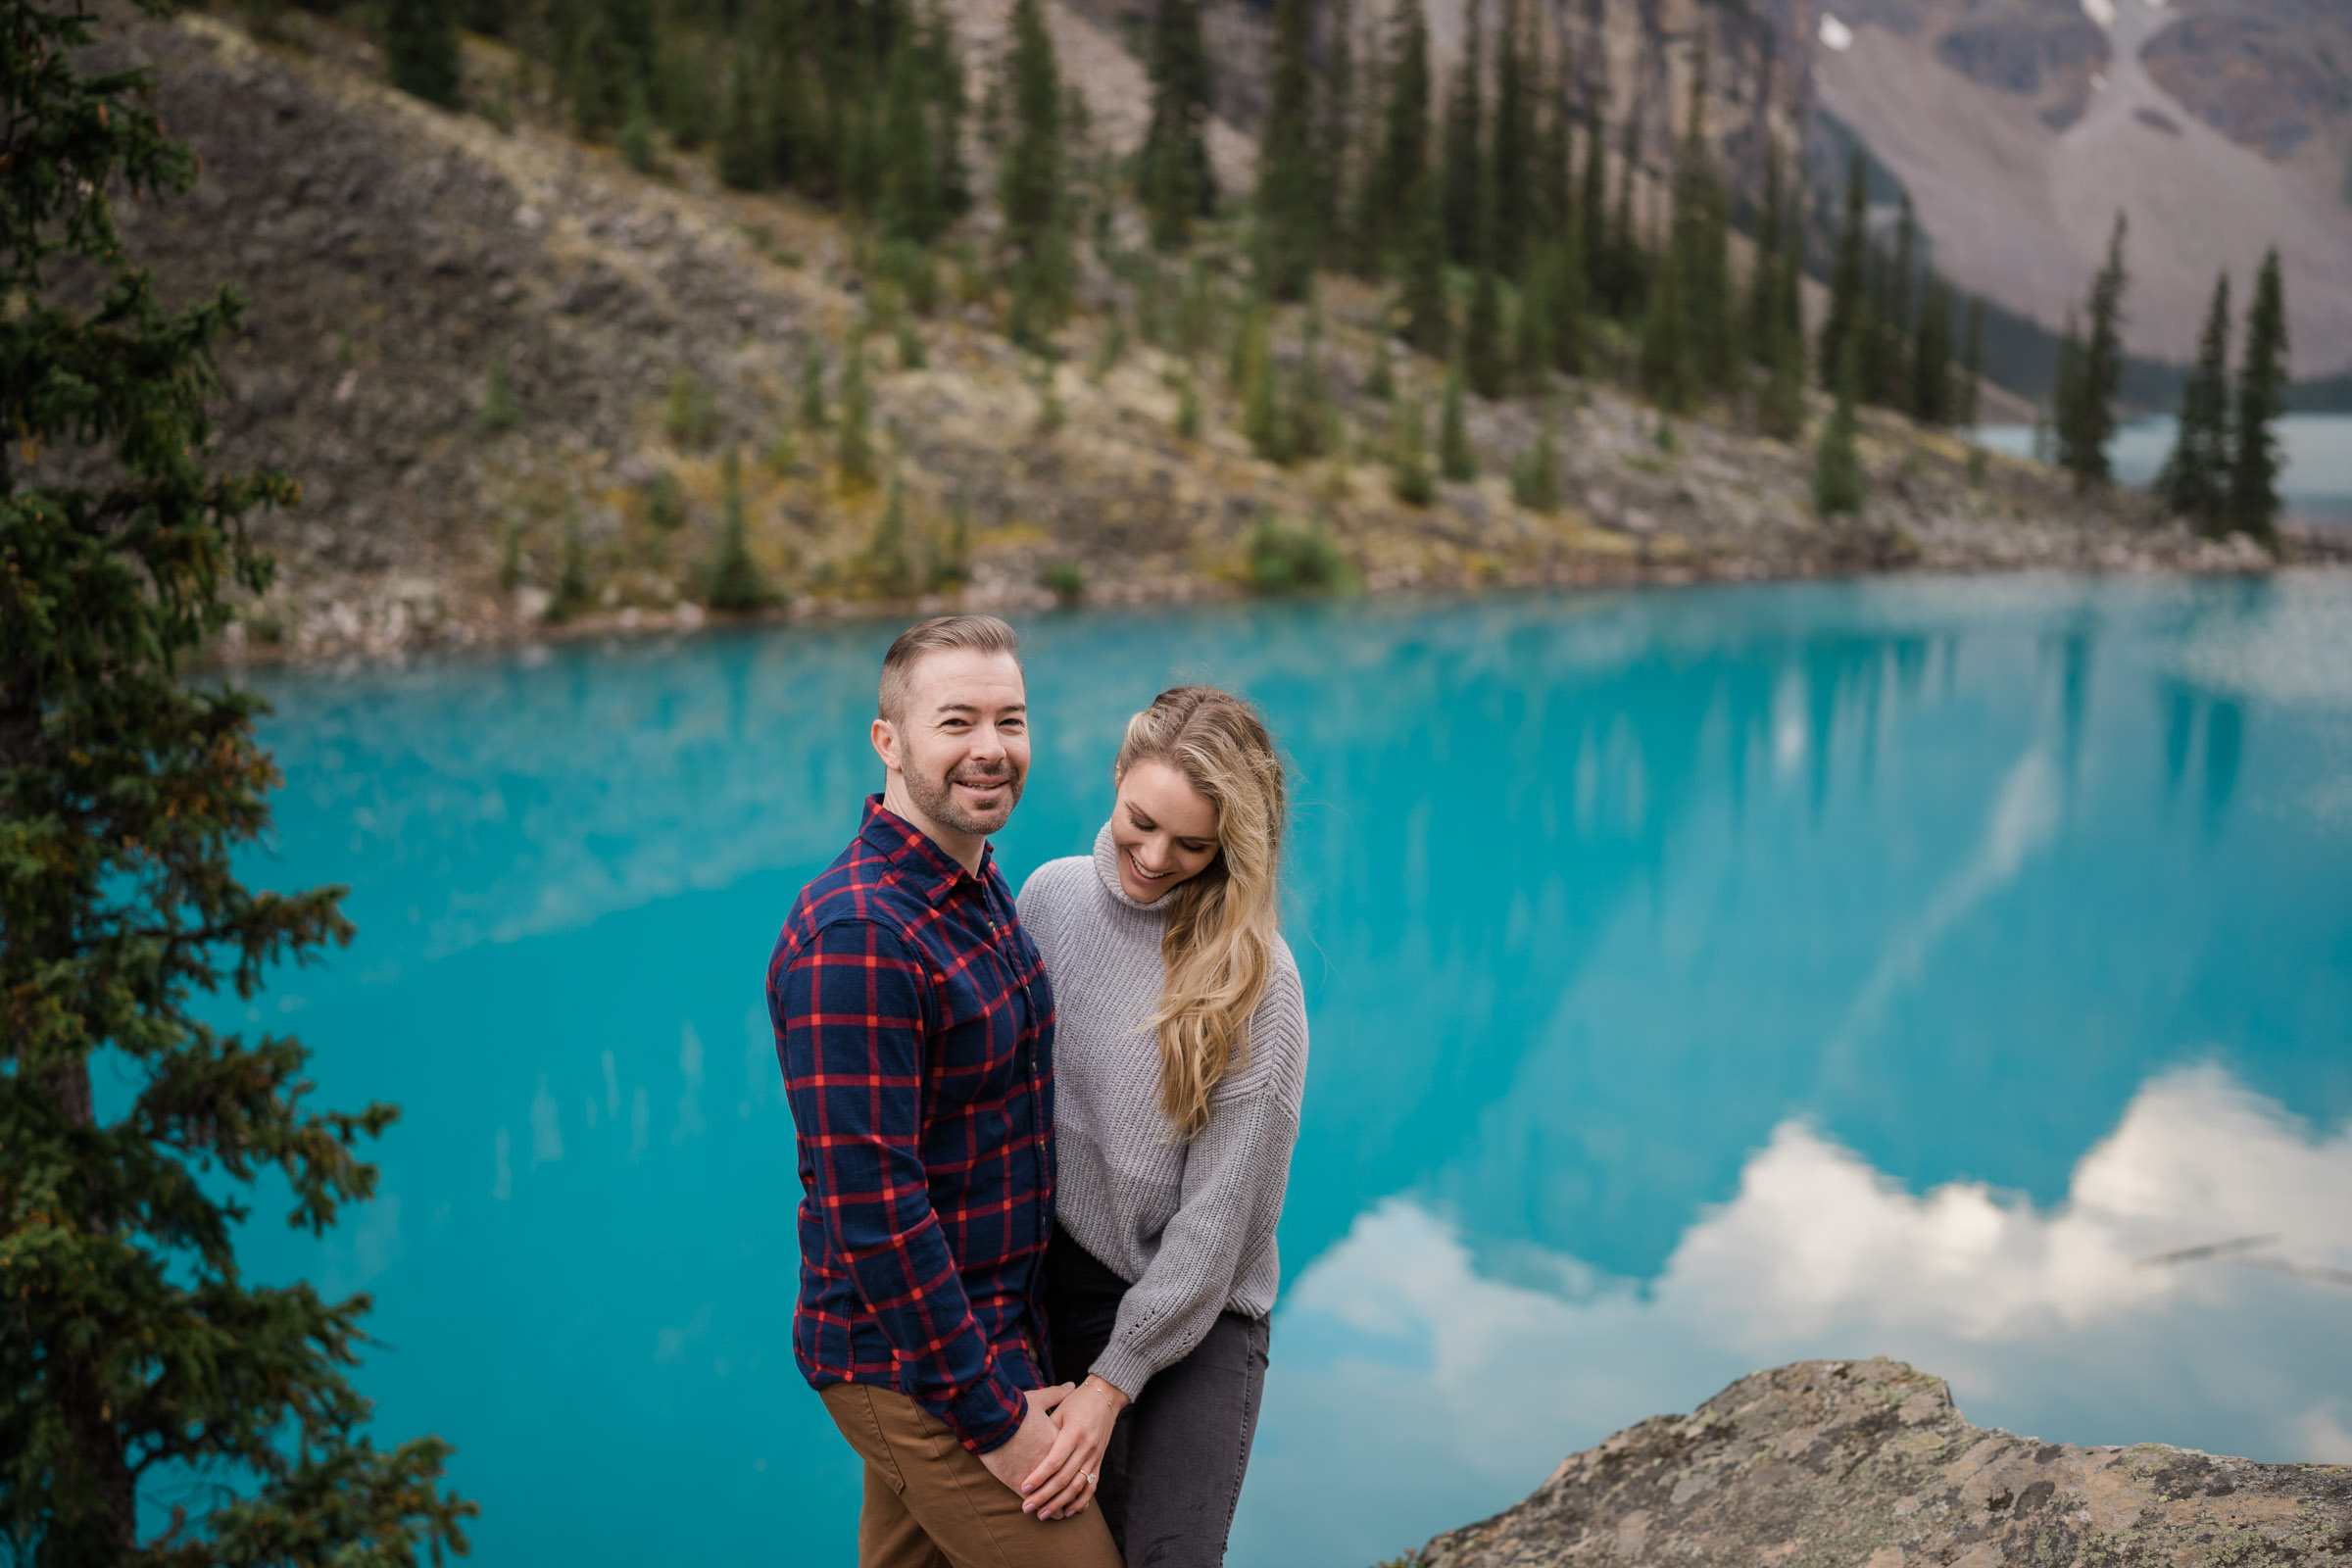 Couple laughs as she looks down at her new ring and he smiles at the camera in front of the turquoise blue of Moraine Lake.